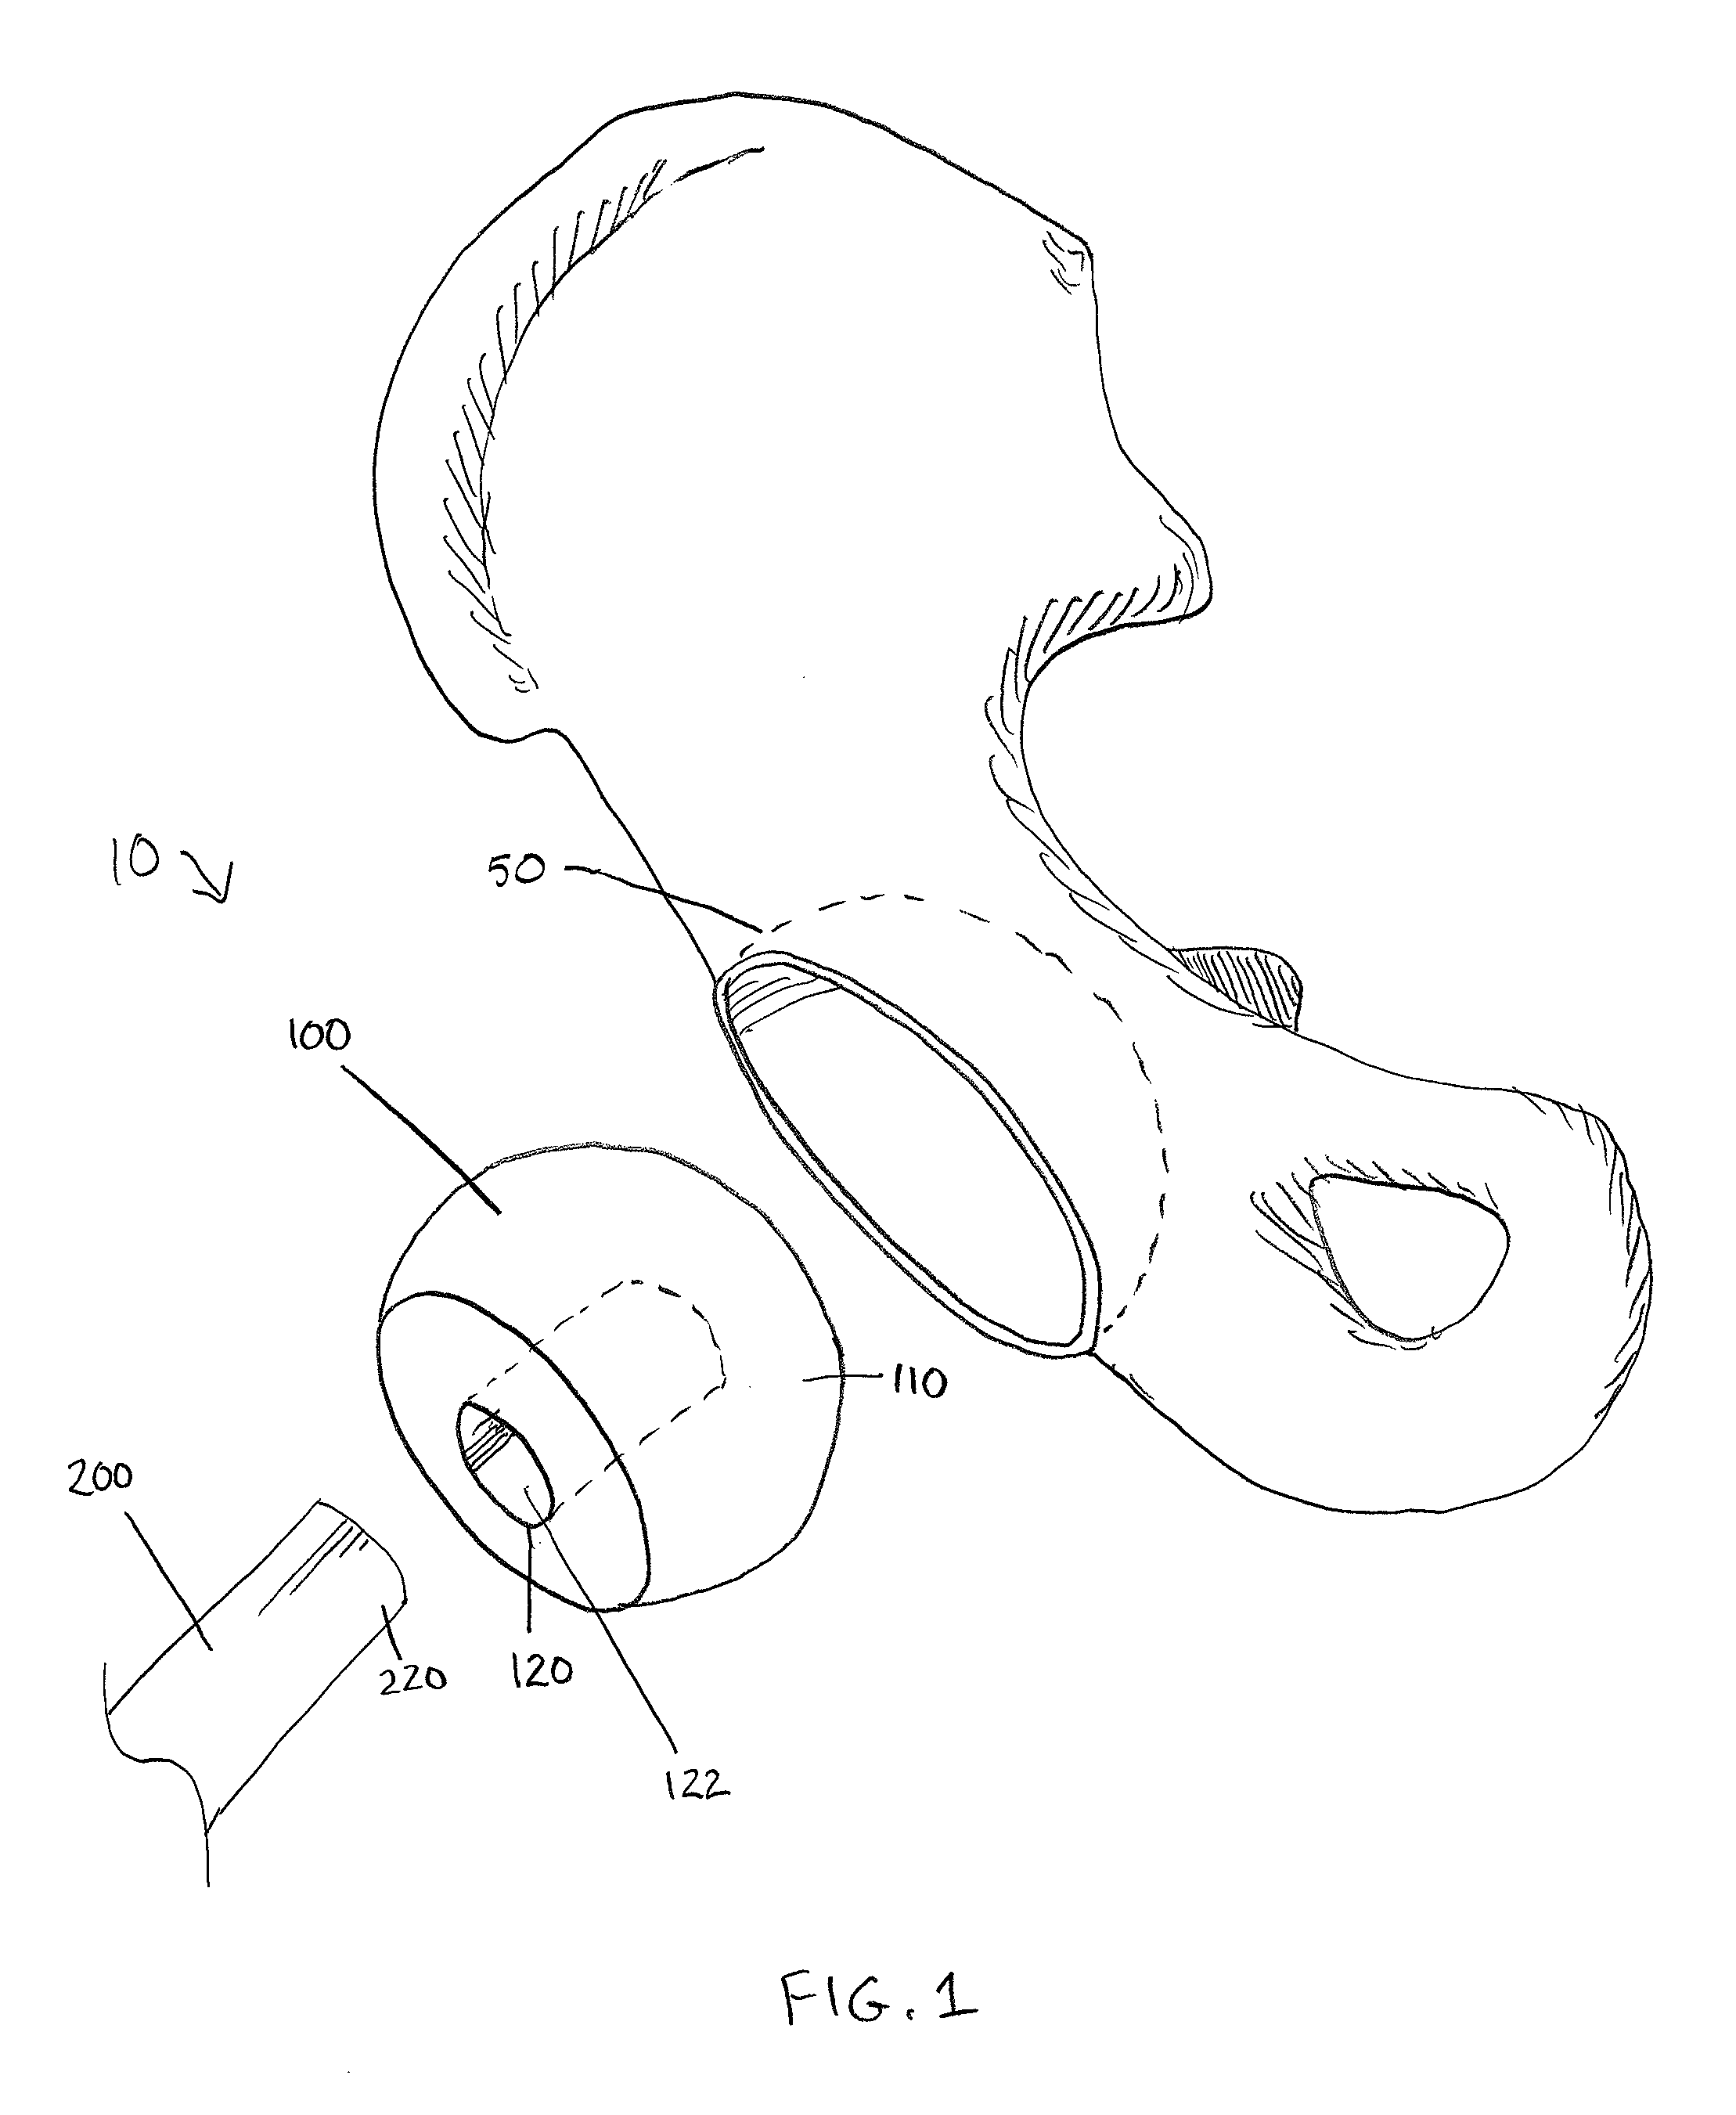 Method and apparatus for attachment in a modular hip replacement or fracture fixation device